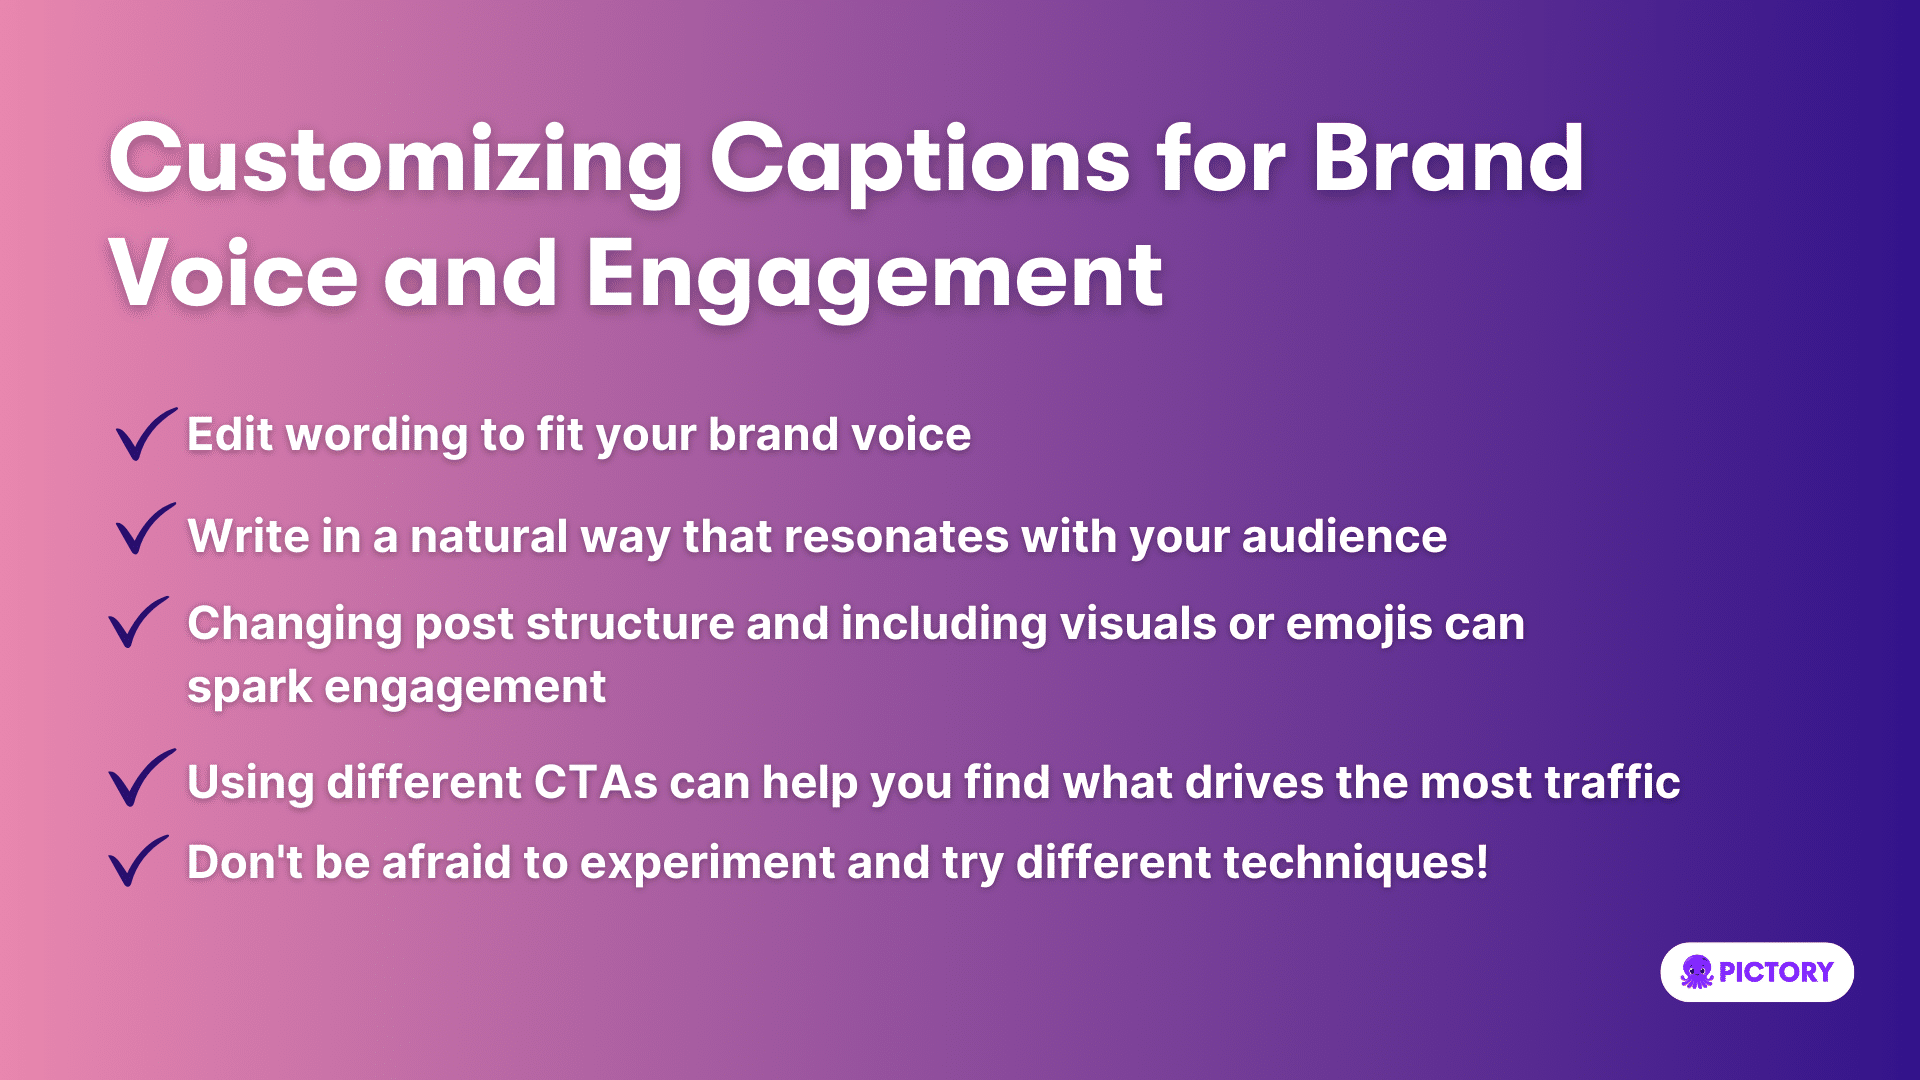 Customizing Captions for Brand Voice and Engagement